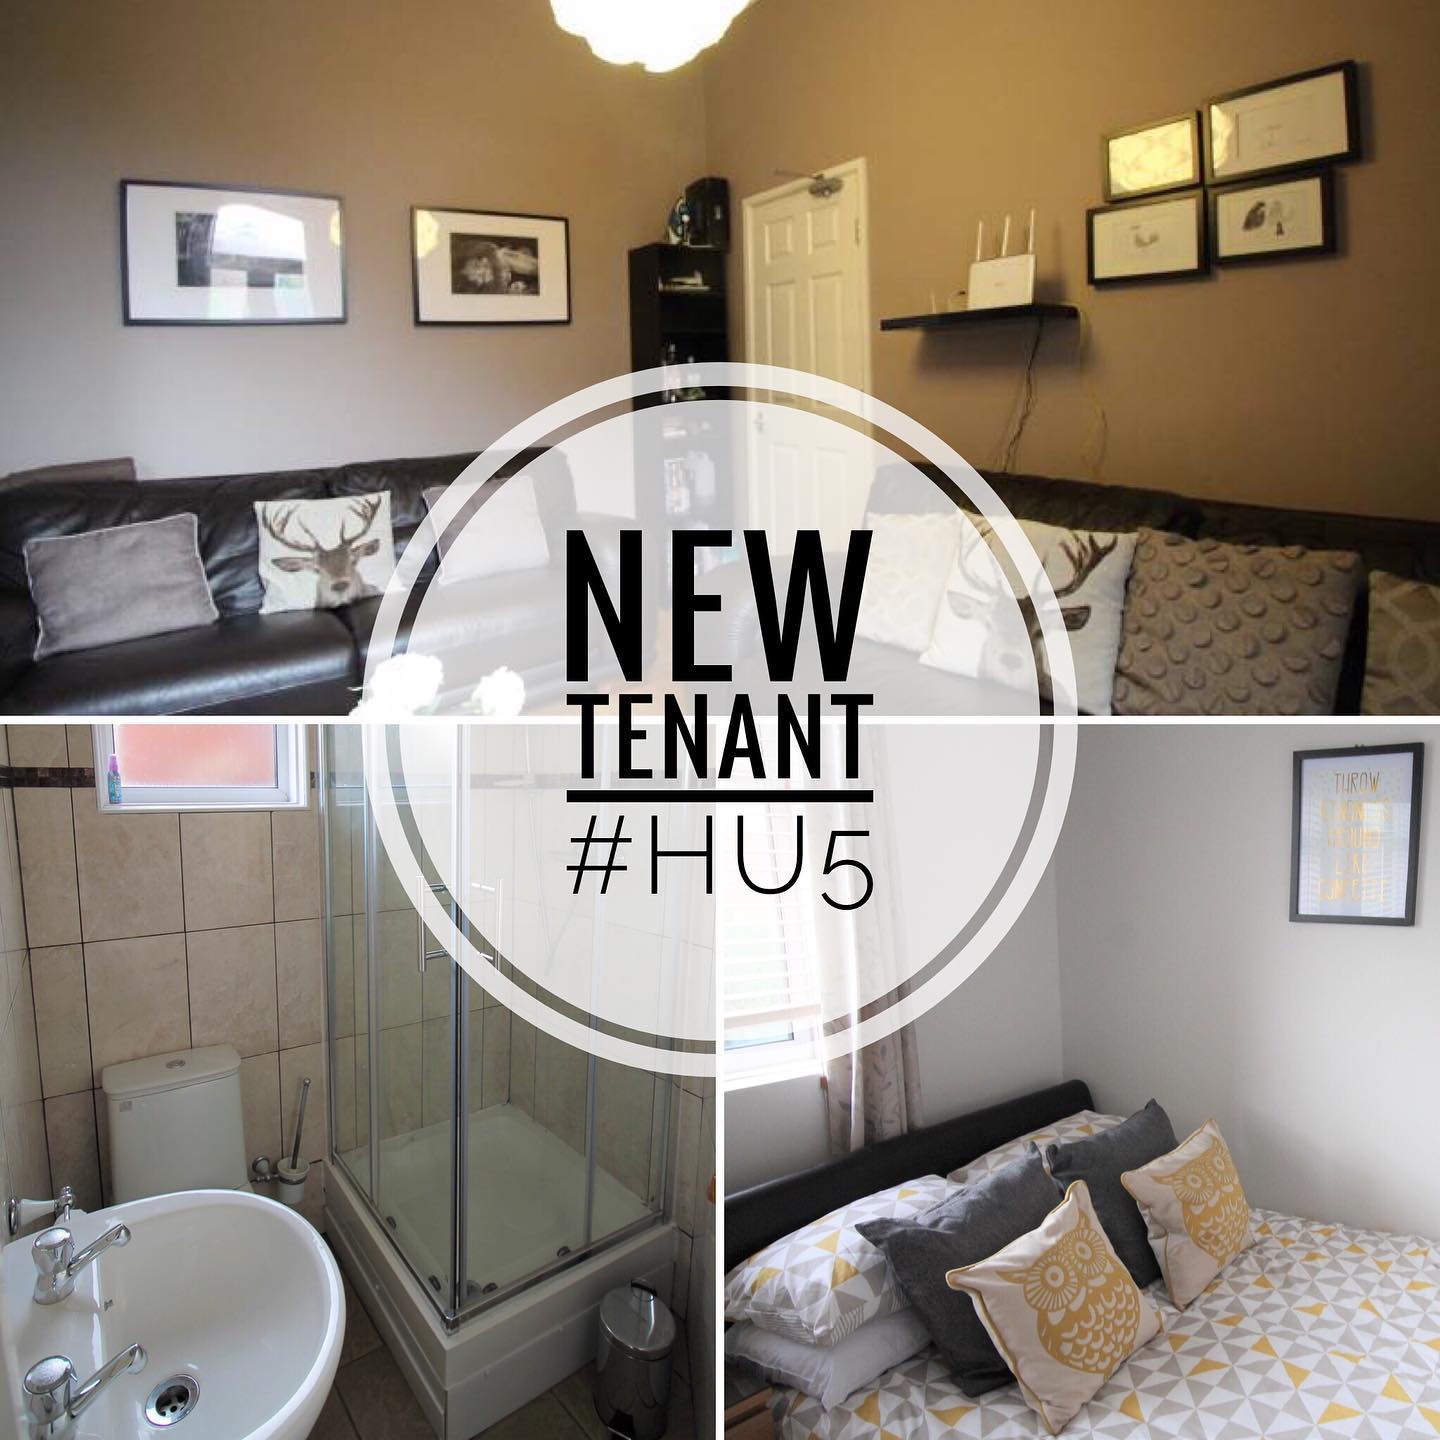 We’ve been busy checking tenants in these last few weeks.. secured a new tenant for this great houseshare on Park Road. We still have another room available at the property, so why not get in touch to view? All bills included, en-suite rooms from £420 pcm. #houseshare #hullhousesharehull #rentalhull #hu5